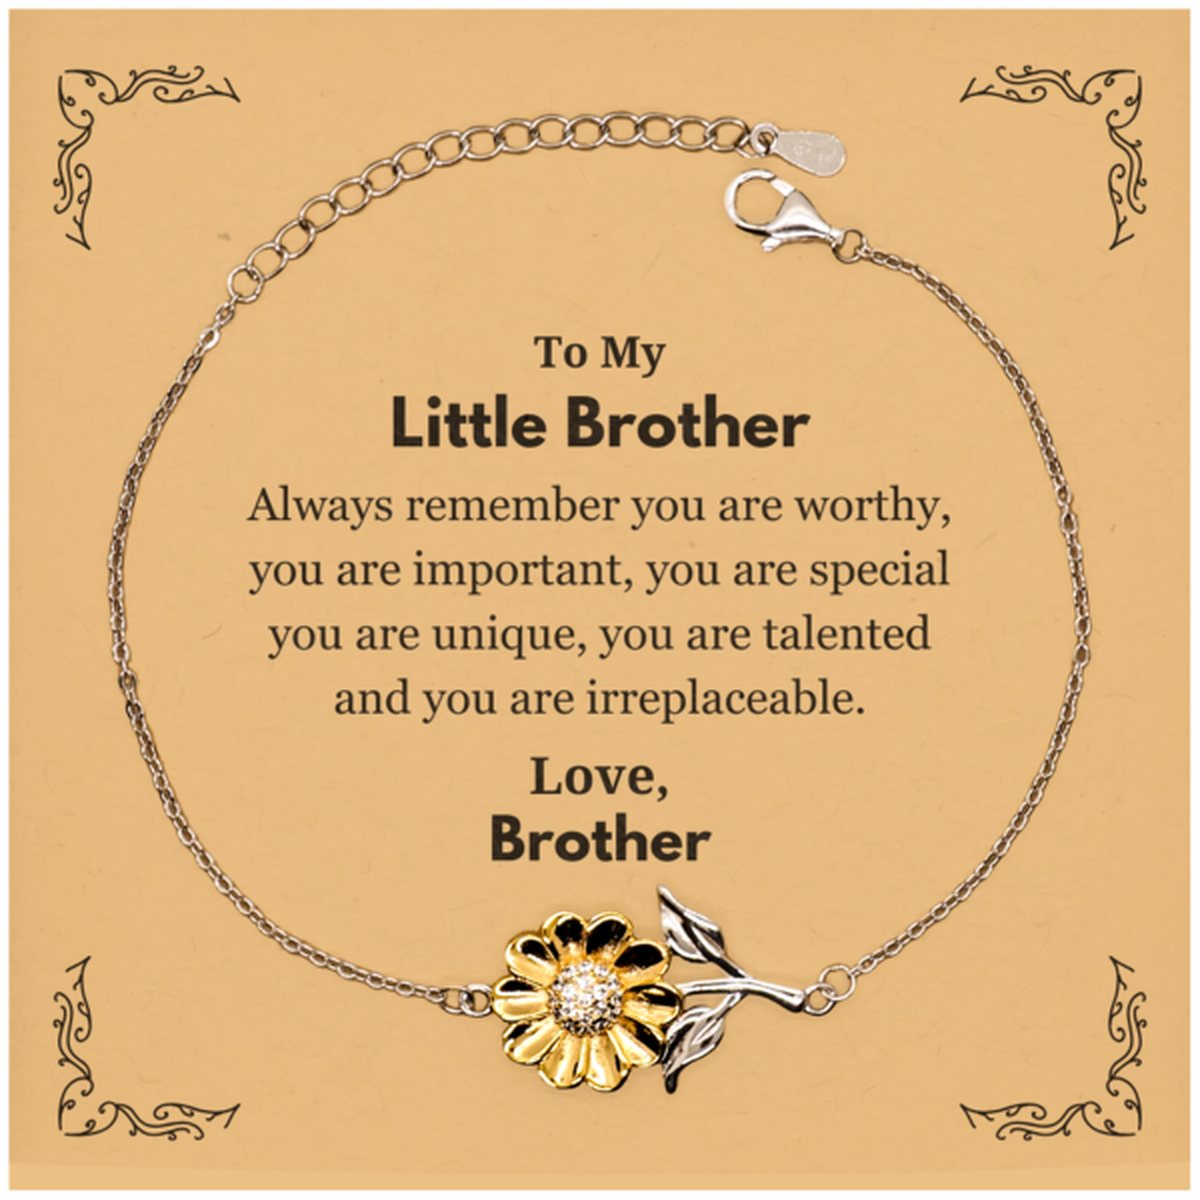 Little Brother Birthday Gifts from Brother, Inspirational Sunflower Bracelet for Little Brother Christmas Graduation Gifts for Little Brother Always remember you are worthy, you are important. Love, Brother